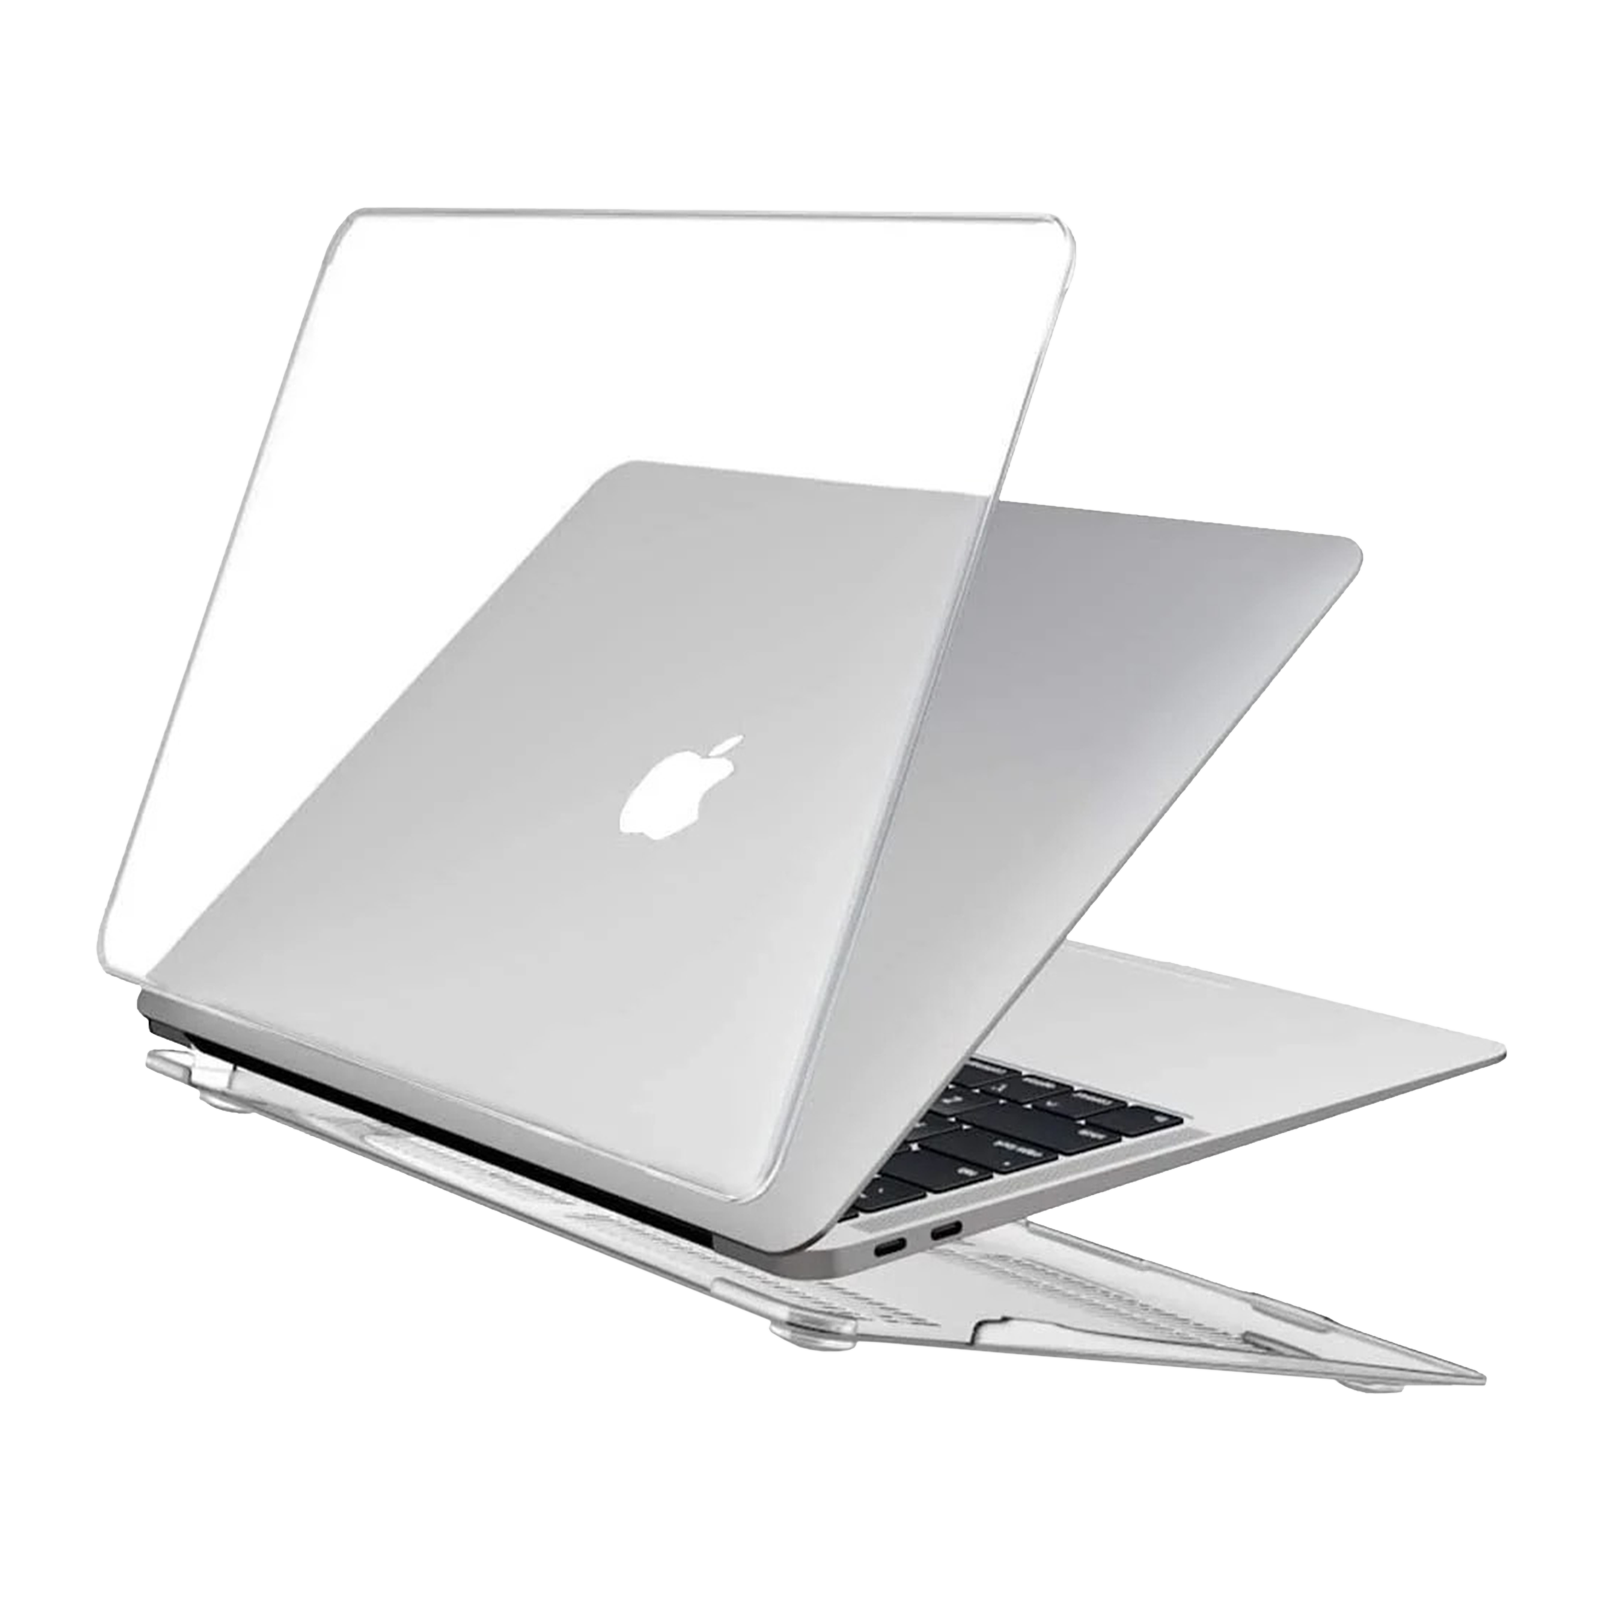 Vaku Luxos Glassinia Polycarbonate Hardshell Protective Case For MacBook Pro 16-Inch (Fully Vented, Clear)_1